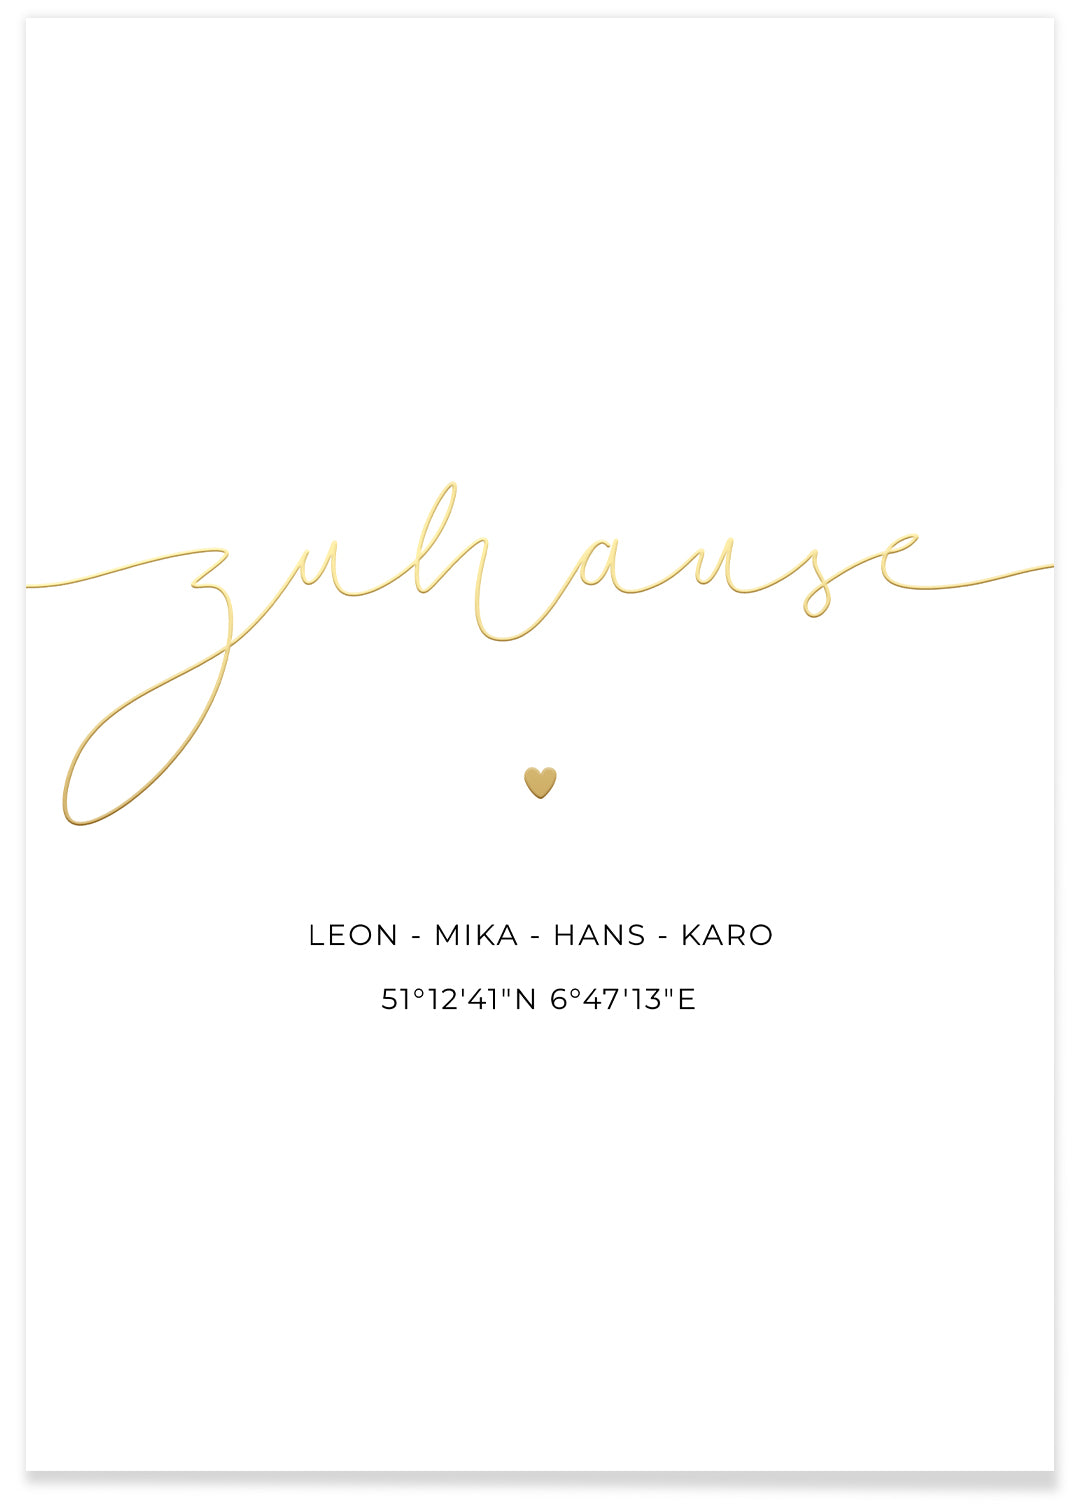 Poster "Your Home" with gold foil